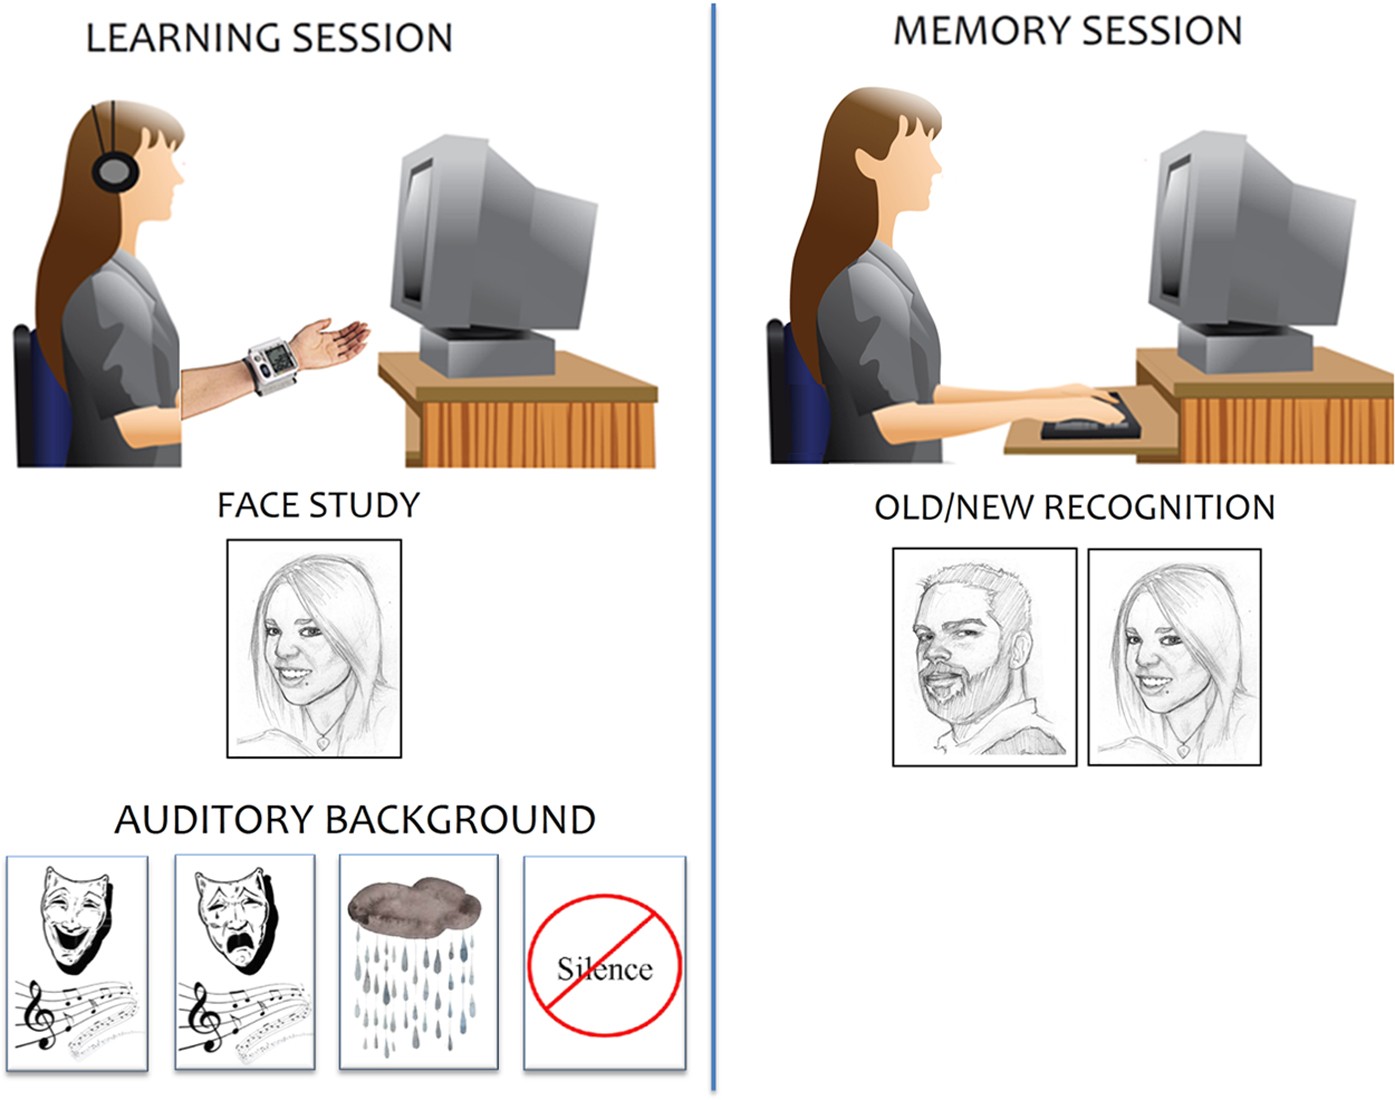 The effect of background music on episodic memory and autonomic responses:  listening to emotionally touching music enhances facial memory capacity |  Scientific Reports